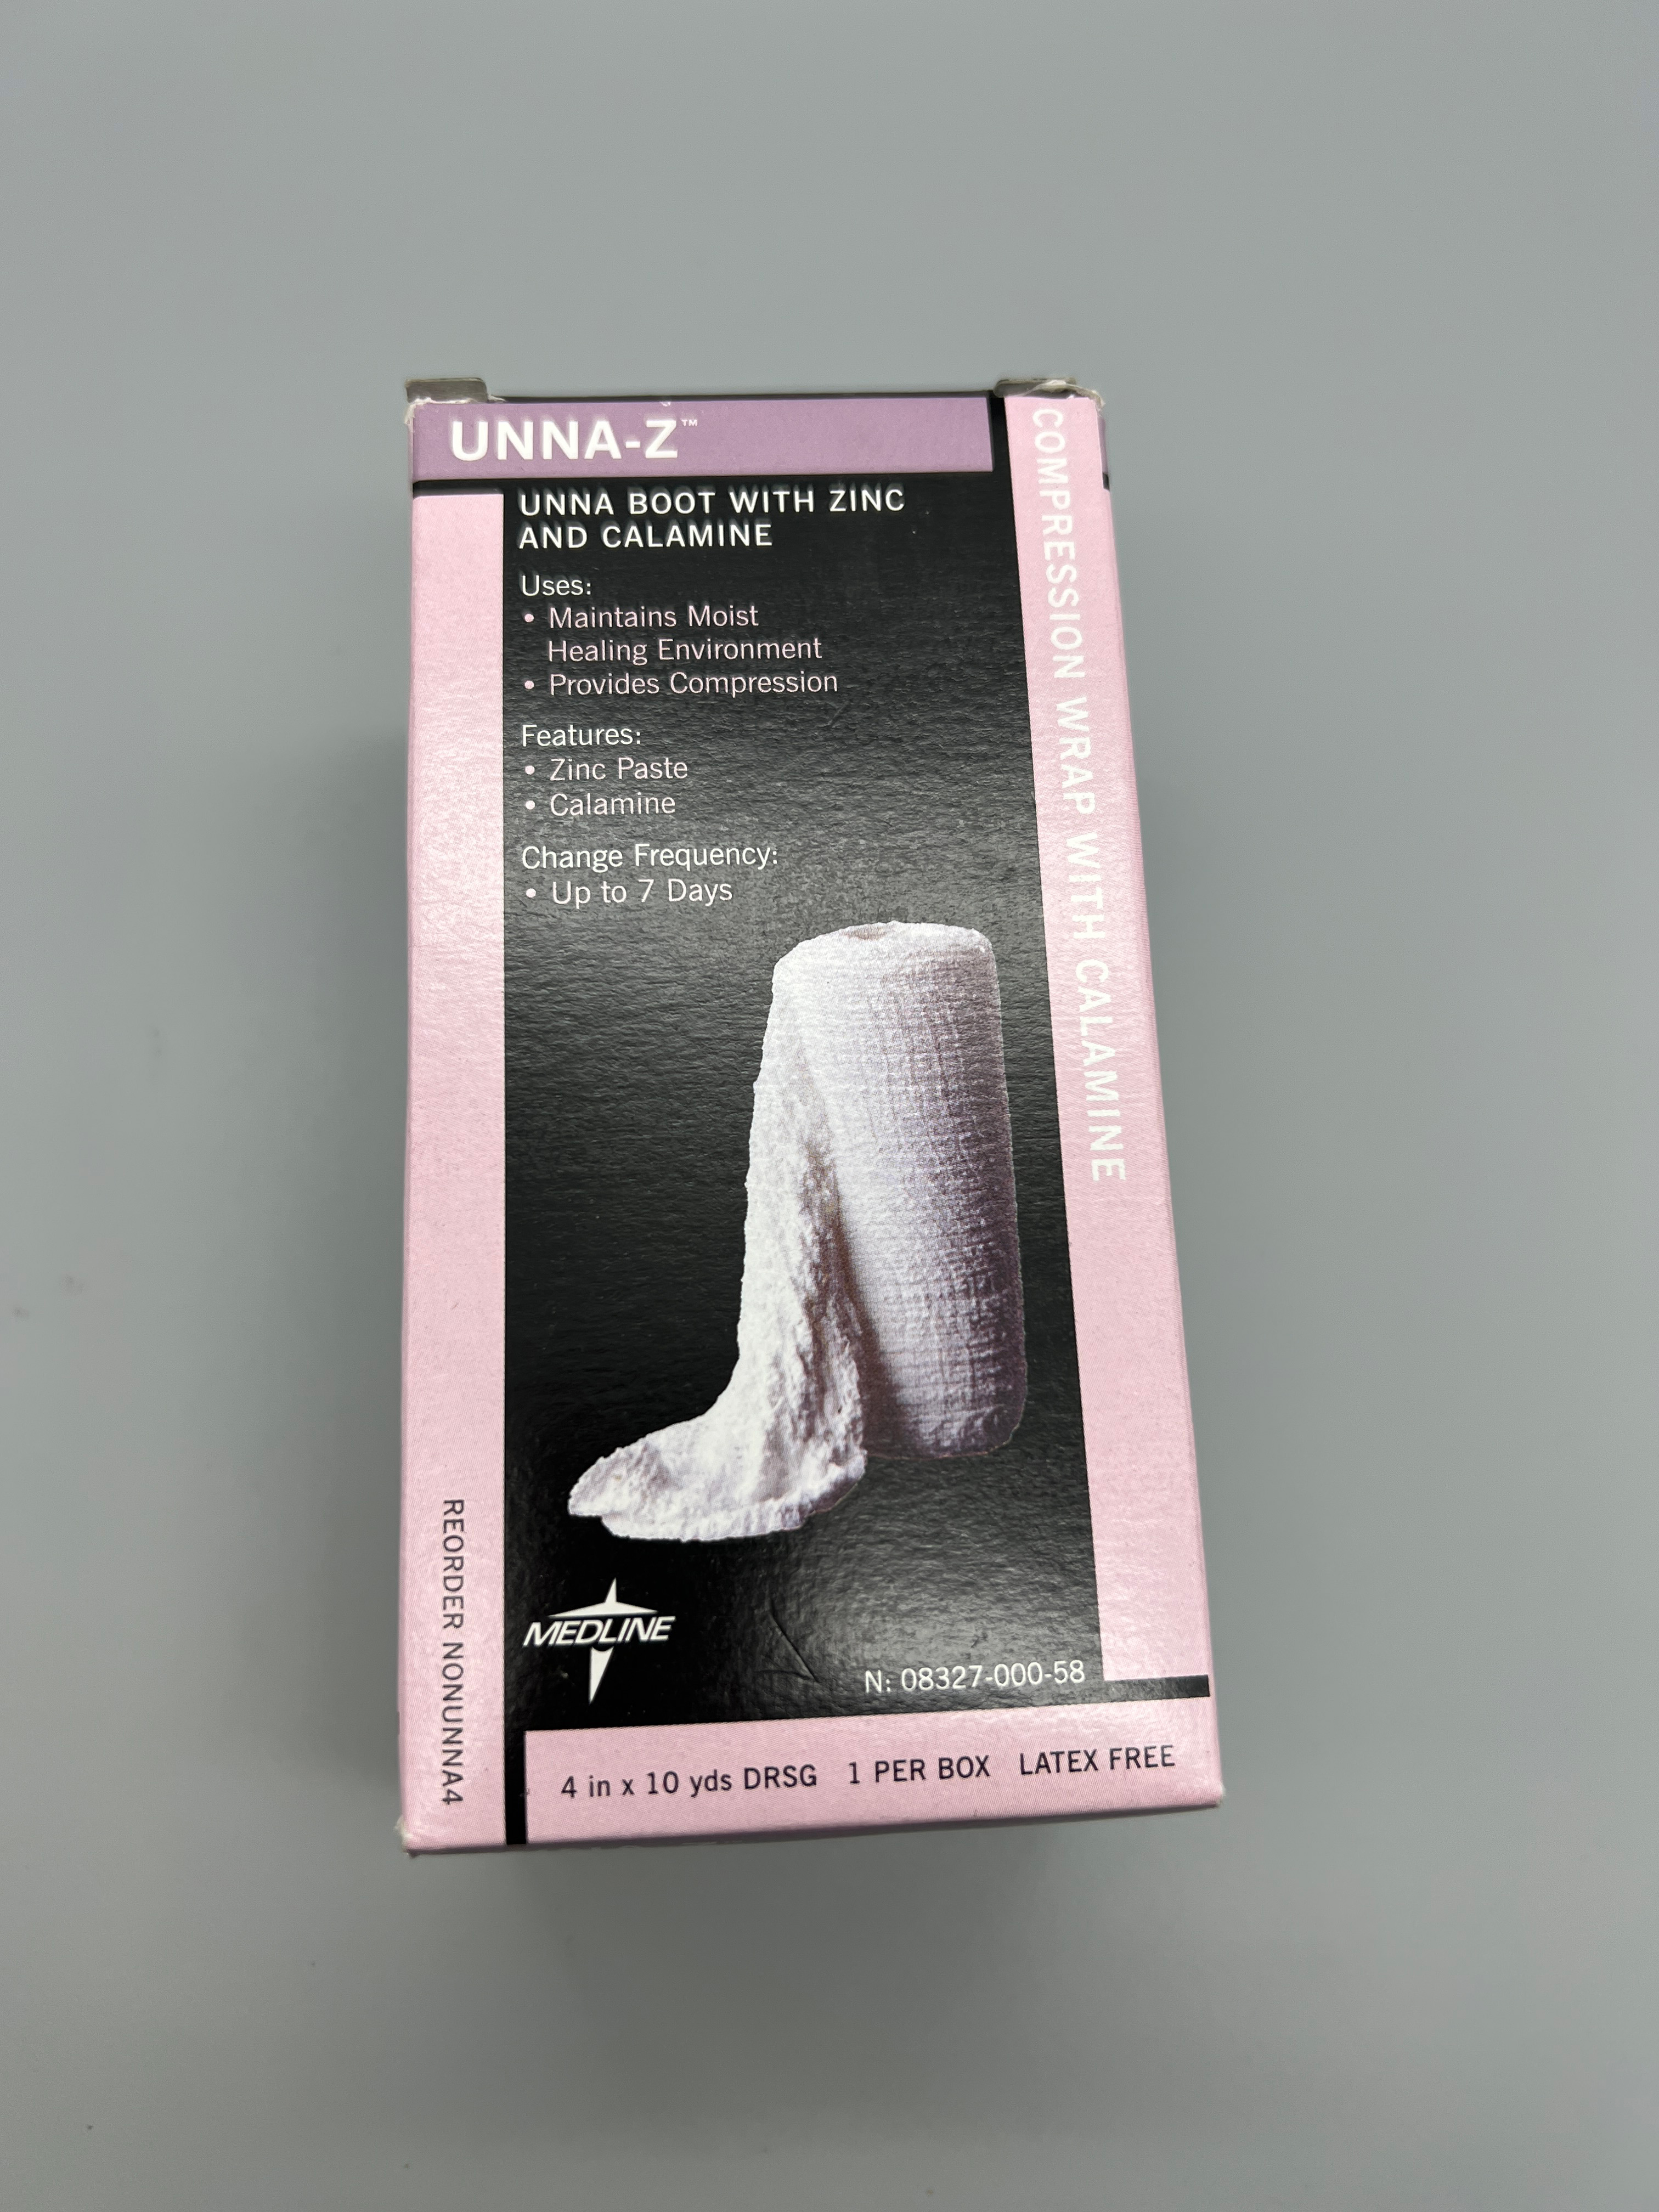 UNNA BOOT WITH ZINC AND CALAMINE